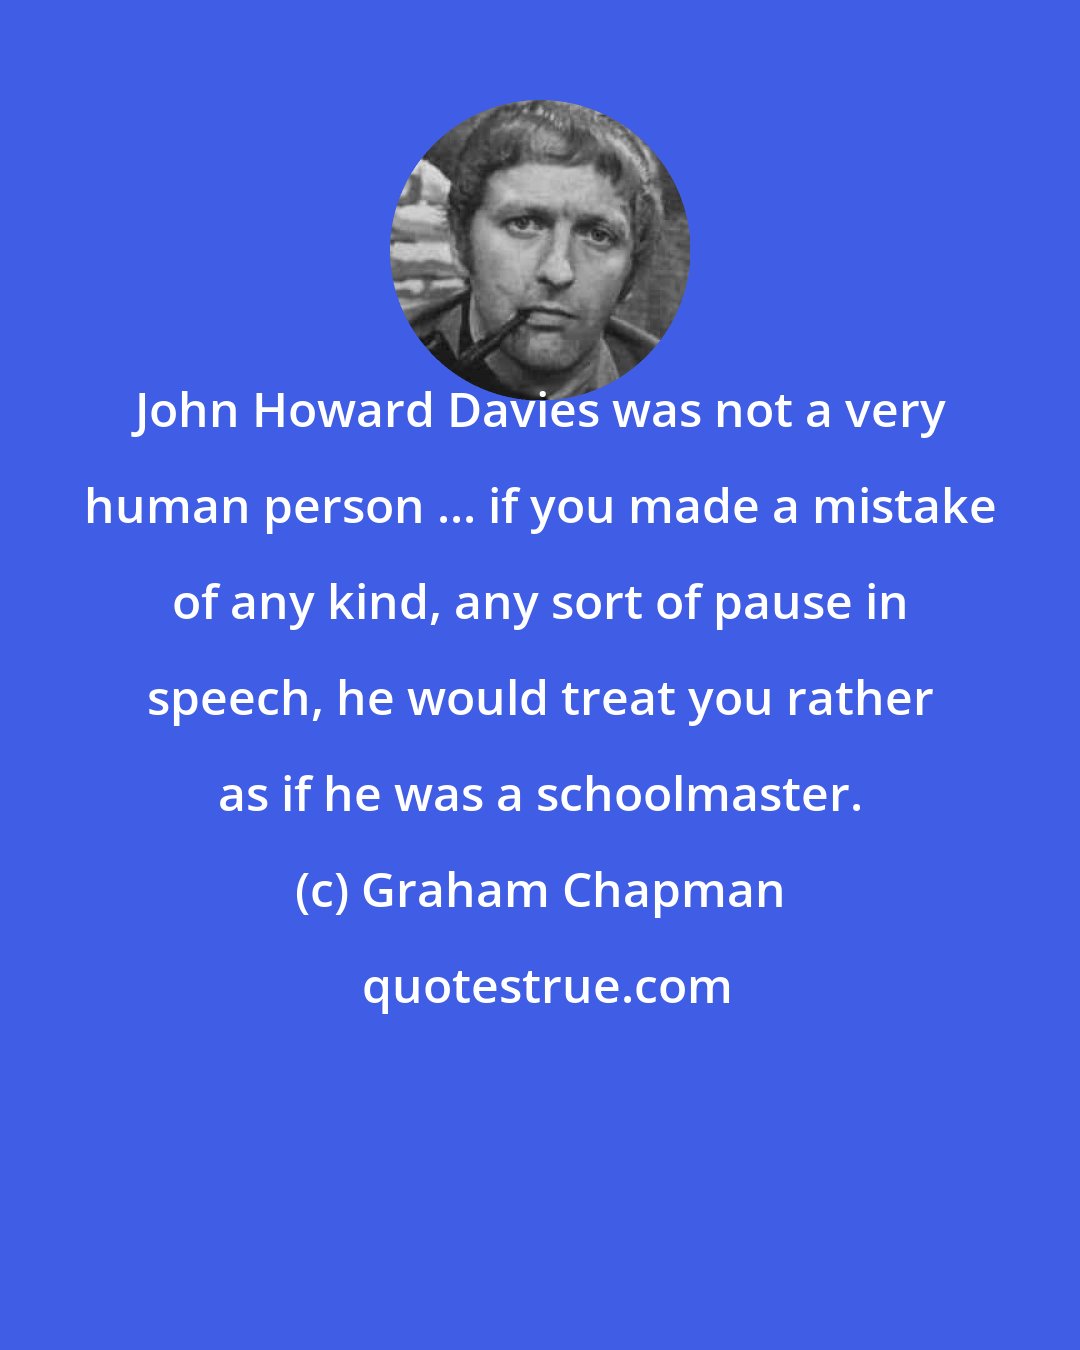 Graham Chapman: John Howard Davies was not a very human person ... if you made a mistake of any kind, any sort of pause in speech, he would treat you rather as if he was a schoolmaster.